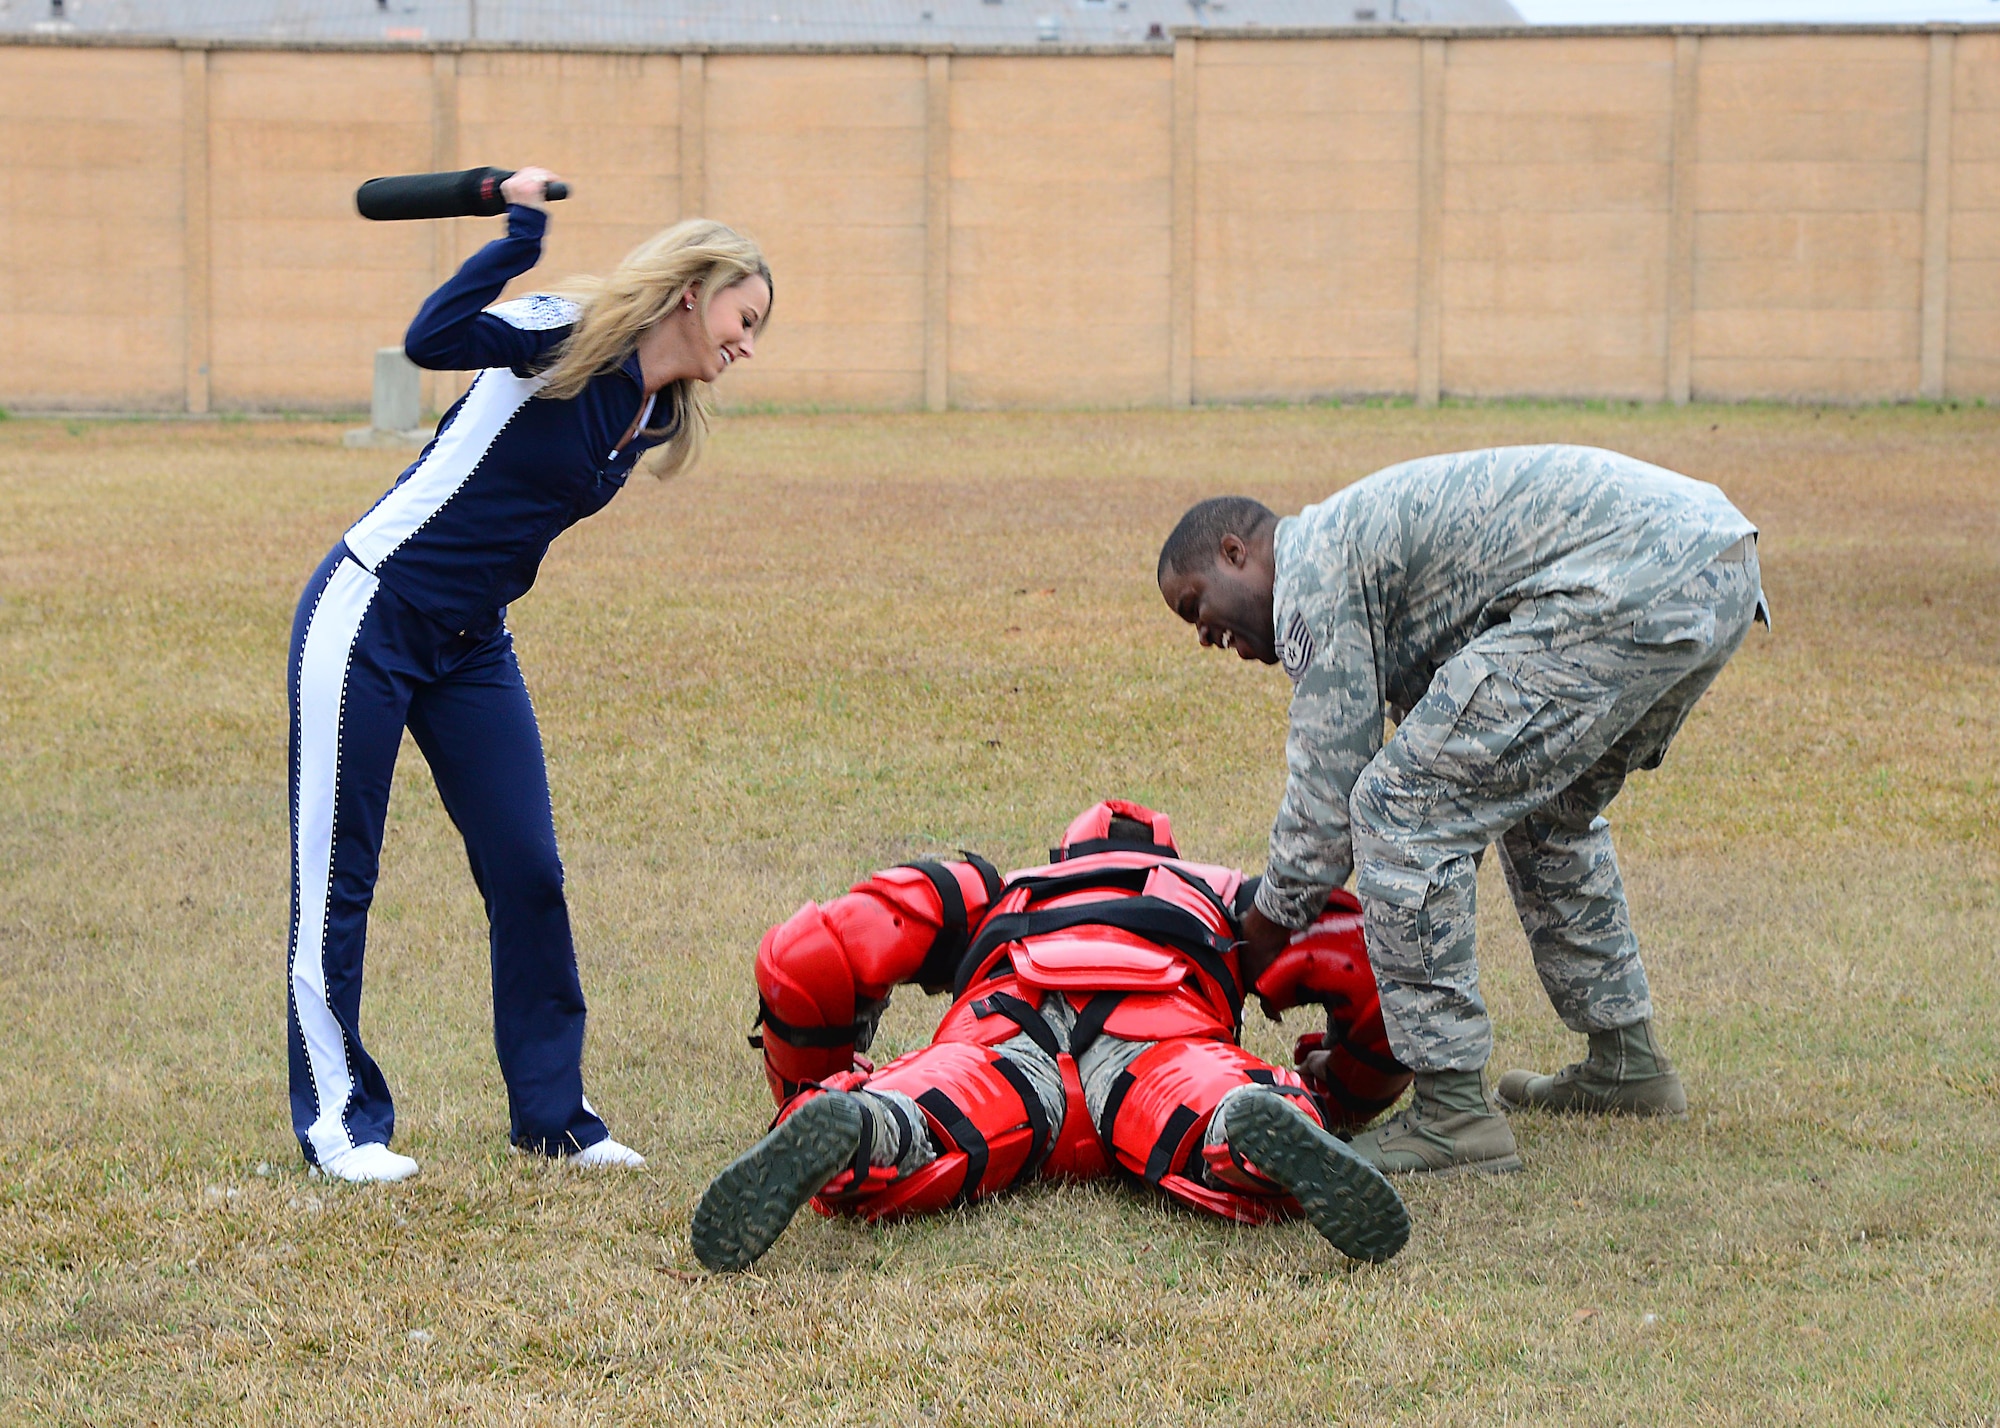 Maggie, a Dallas Cowboys Cheerleader, participates in a hand-to-hand combat simulation with Senior Airman Jasson Adamson, 14th Security Forces Squadron unit trainer, and Tech. Sgt. Miguel Stewart, 14th SFS NCO in Charge of Training, Dec. 4, 2017, on Columbus Air Force Base, Mississippi. The demonstration was part of a tour visit the cheerleaders made to the base. (U.S. Air Force photo by Airman 1st Class Beaux Hebert)